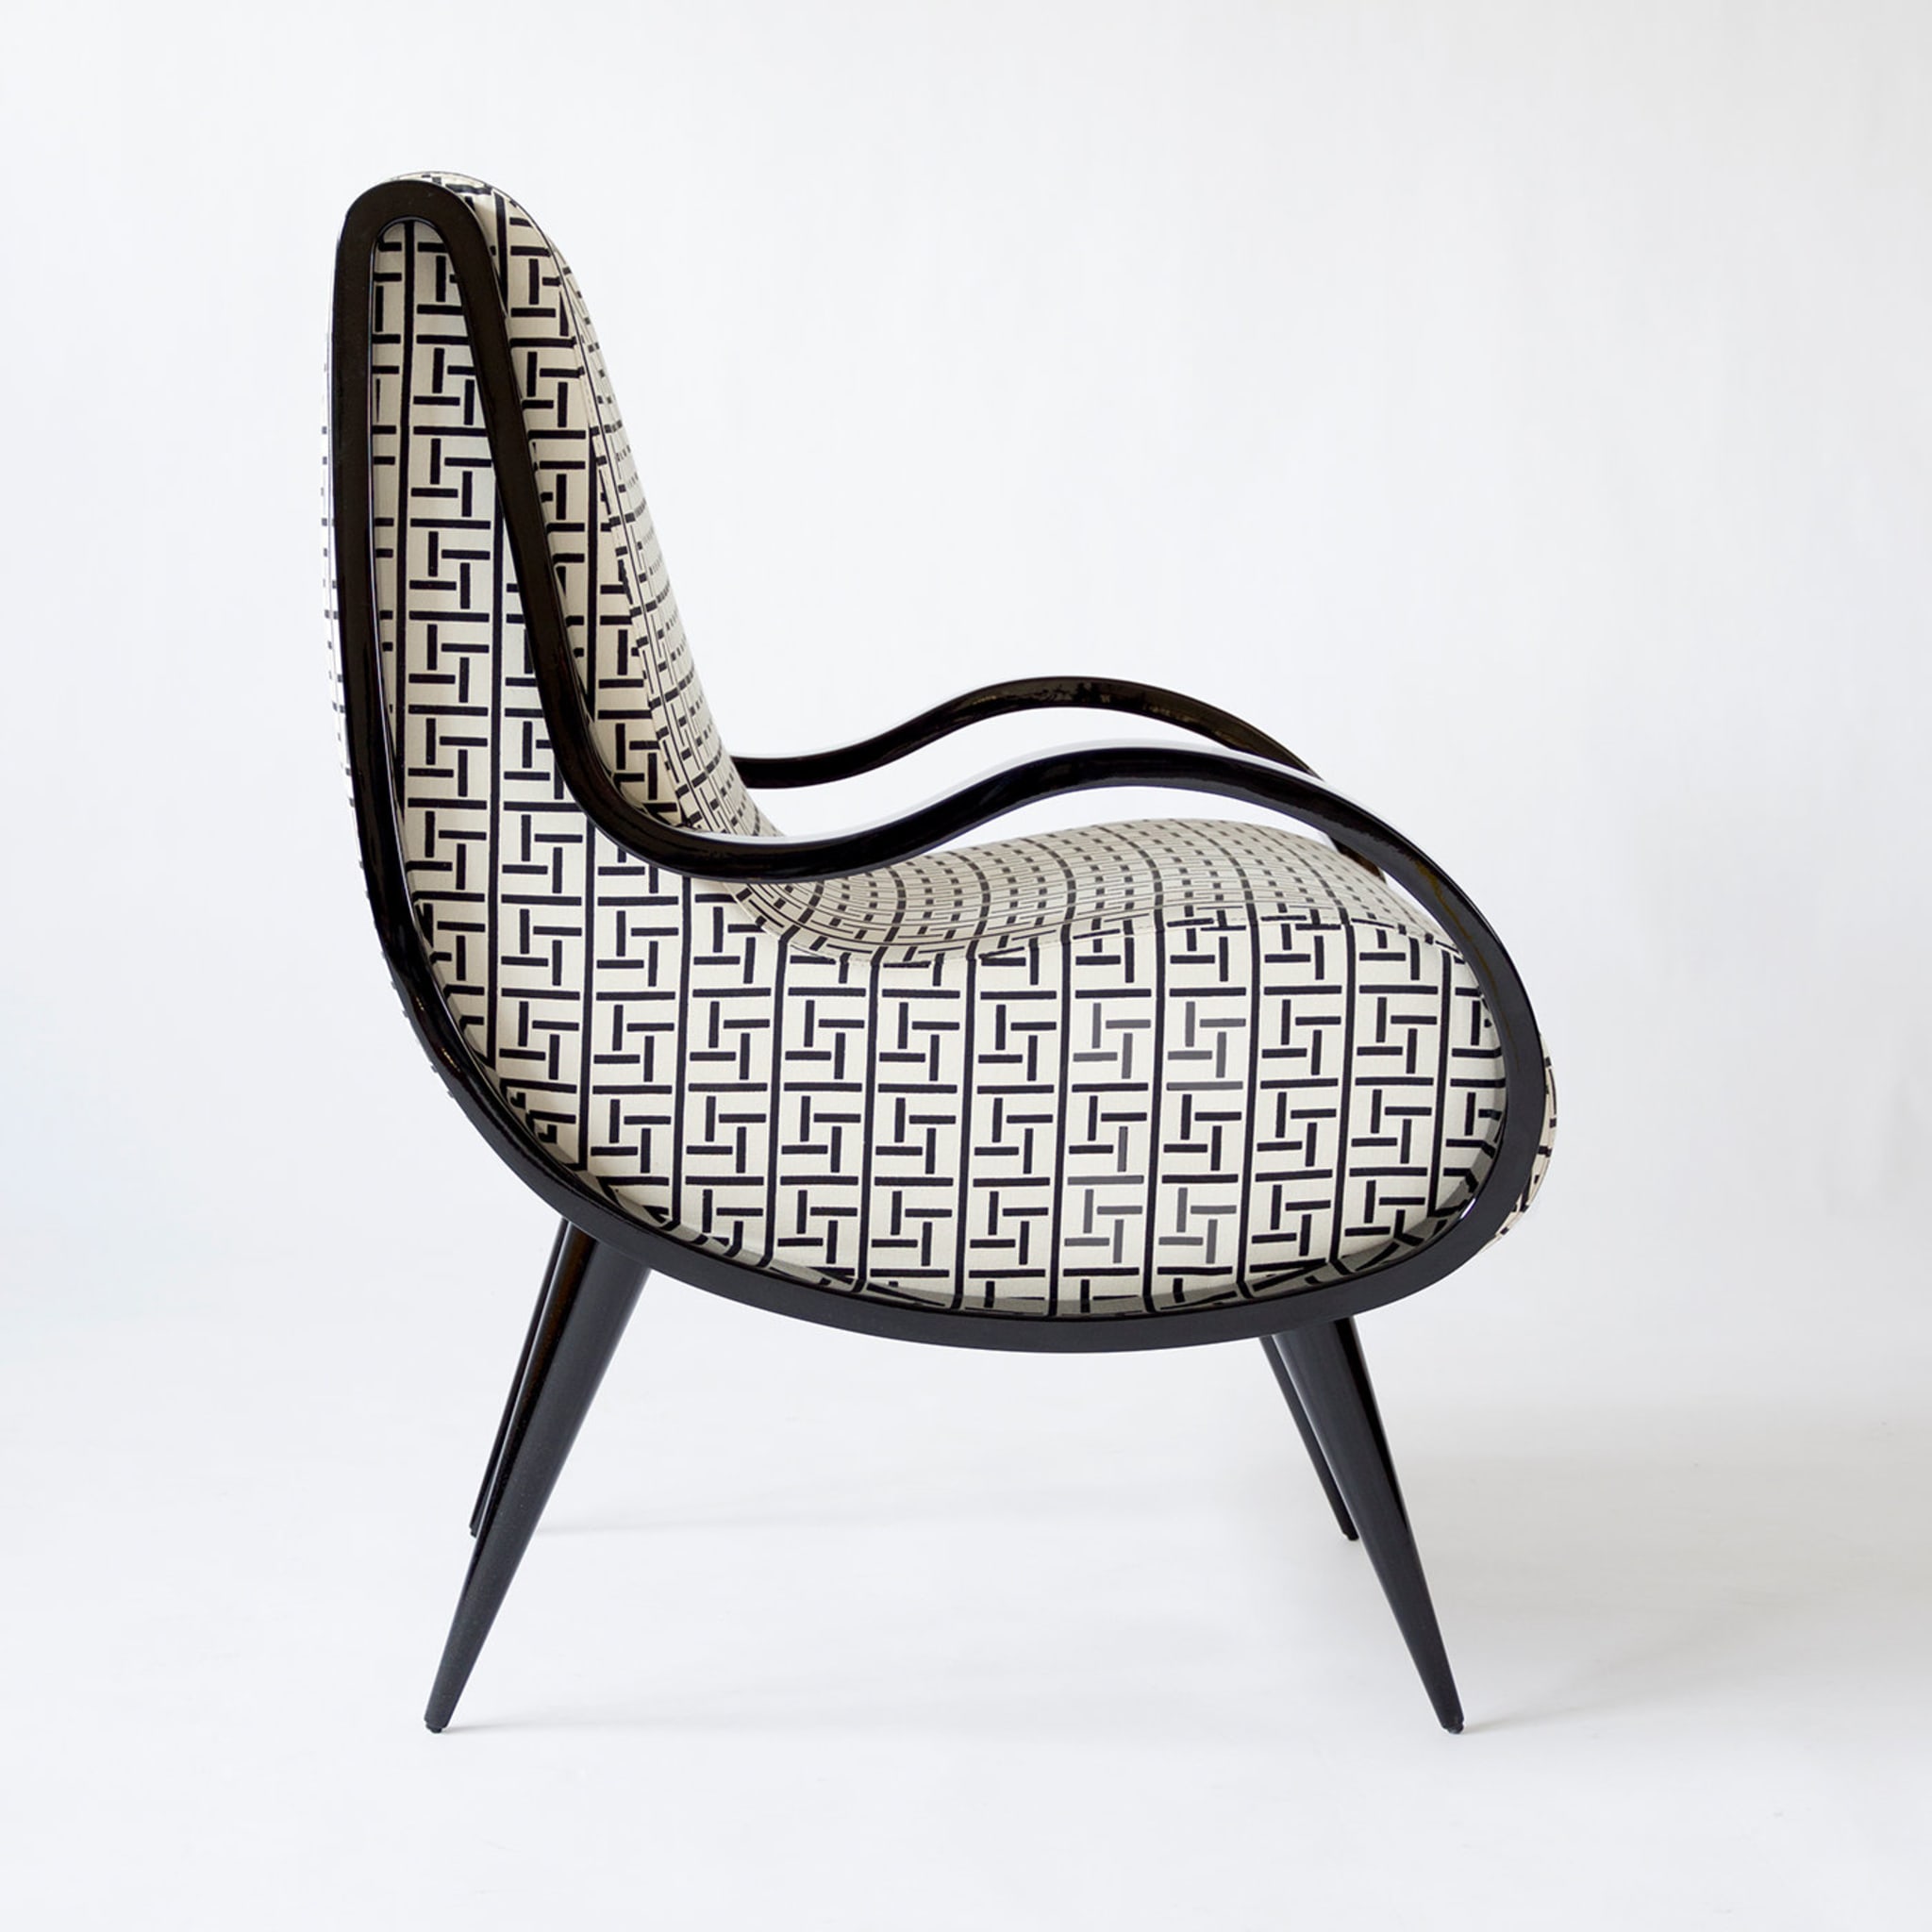 Eclipse armchair in black and white fabric - Alternative view 1